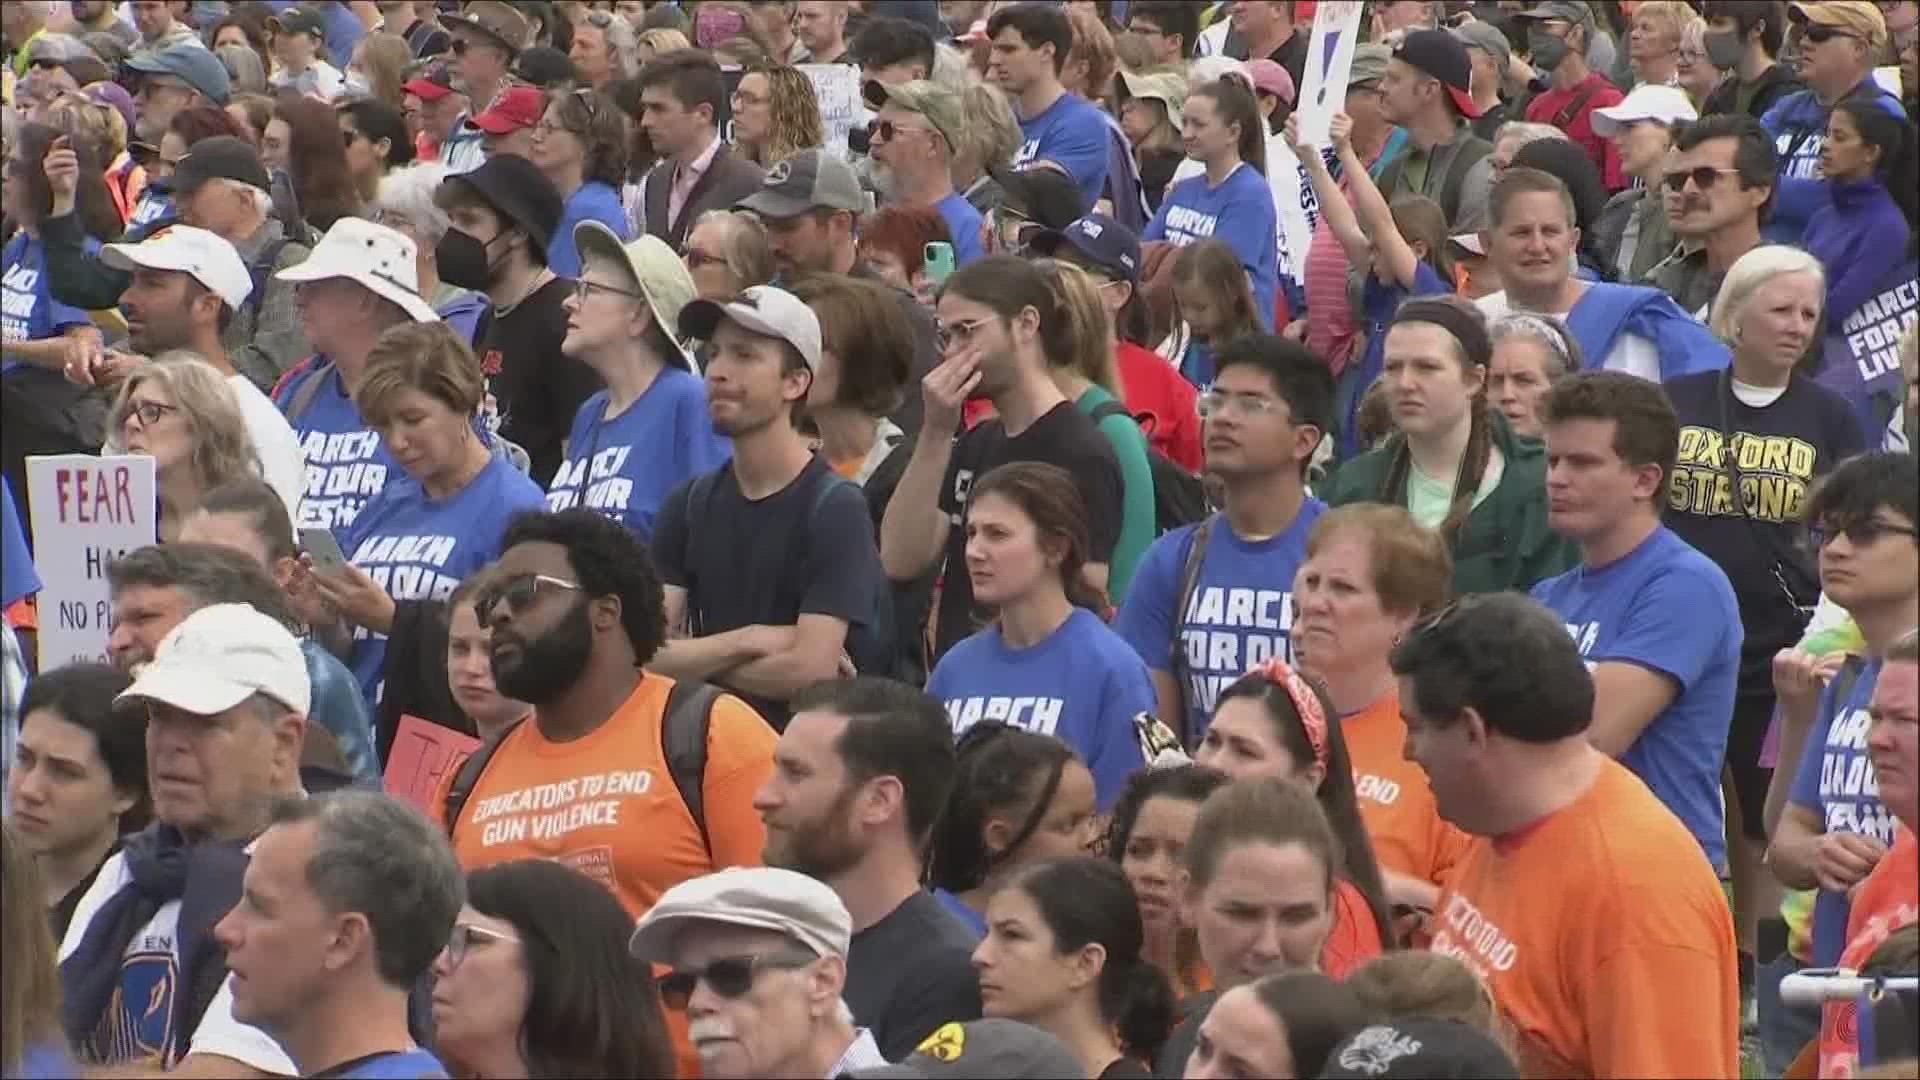 The national March for Our Lives protests taking place in the wake of the recent deadly shootings in Buffalo, New York and Uvalde, Texas .